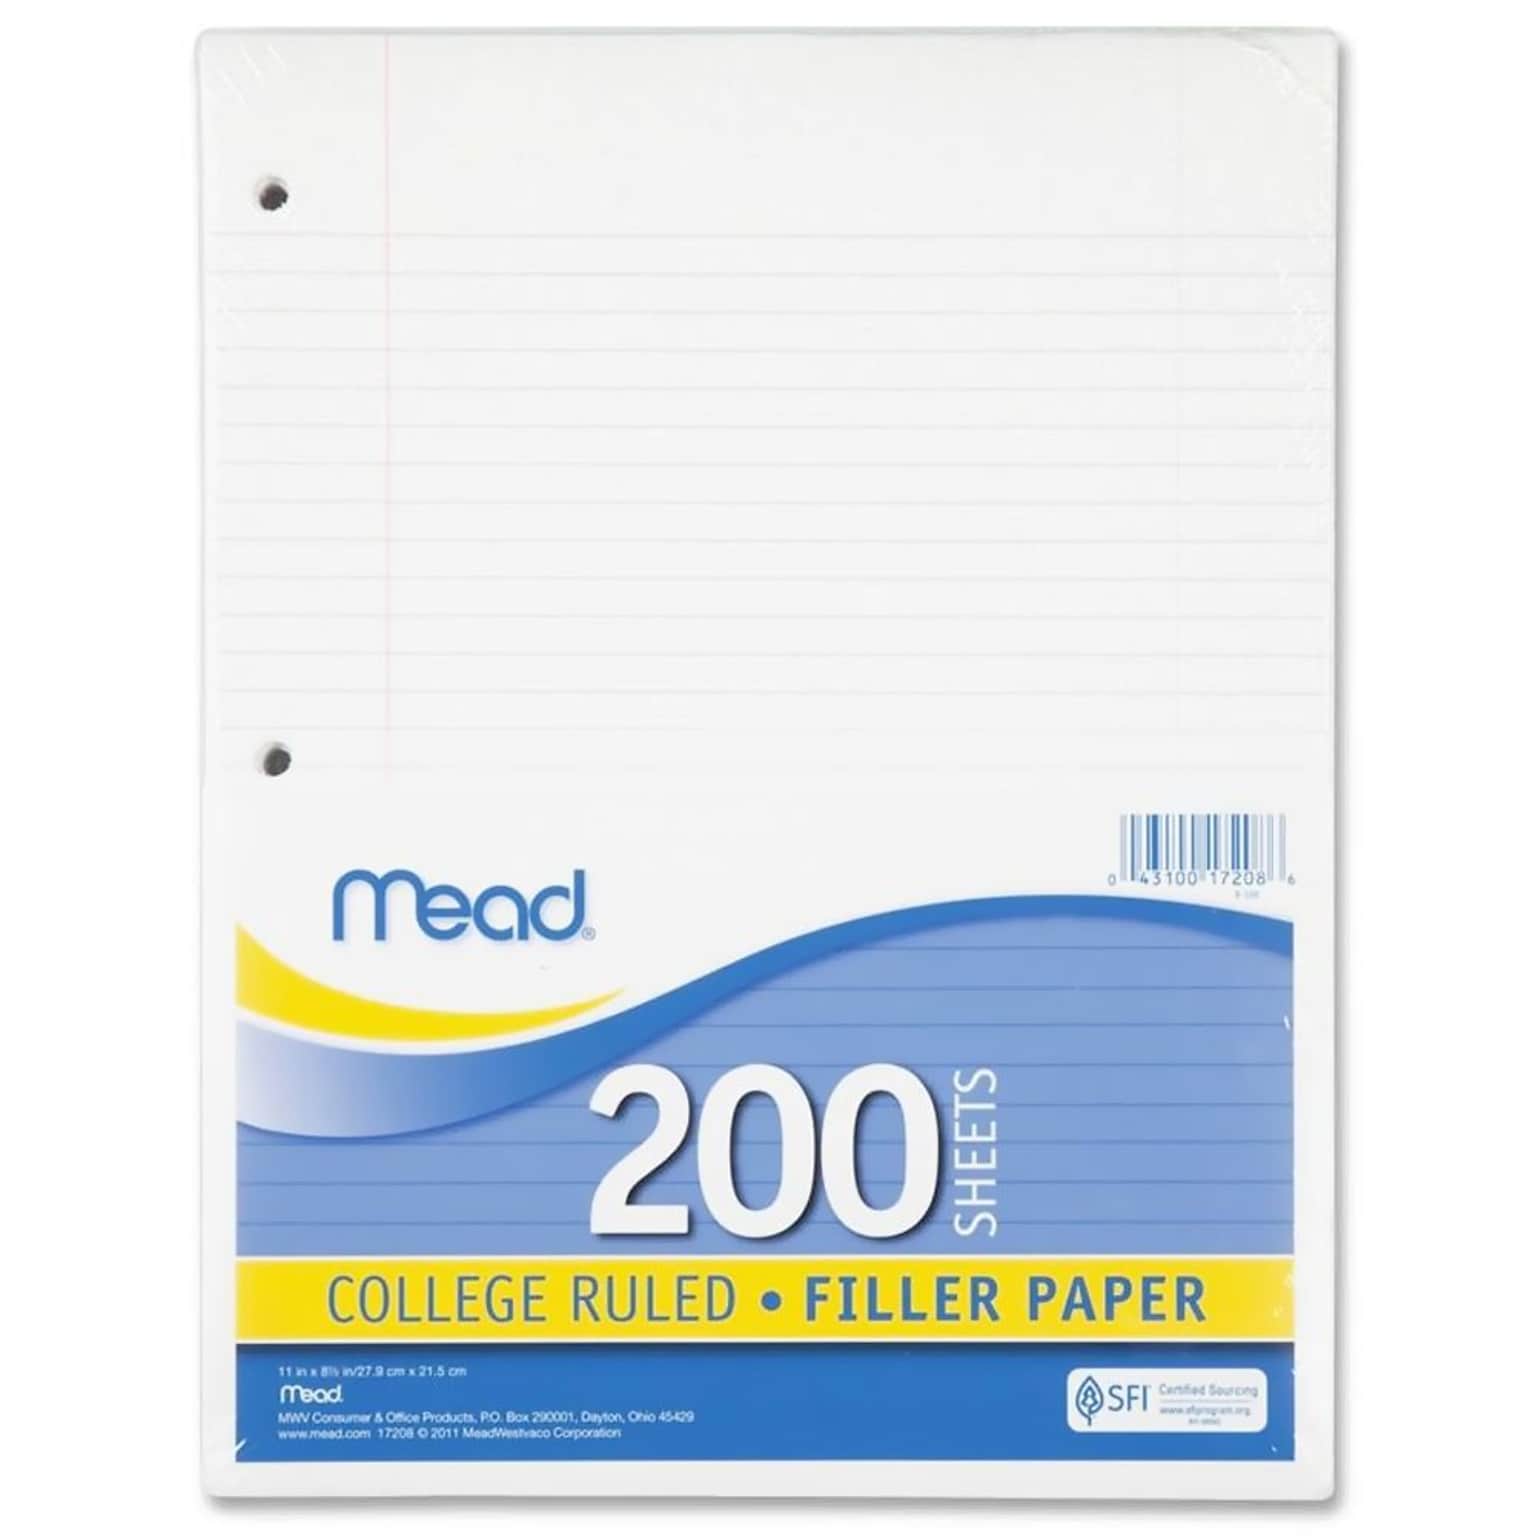 Filler Paper, College Ruled, 3 Hole Punched, 16 lb Stock, Red Margin Rule, 8-1/2x11, White, 200 Sheets/Pack